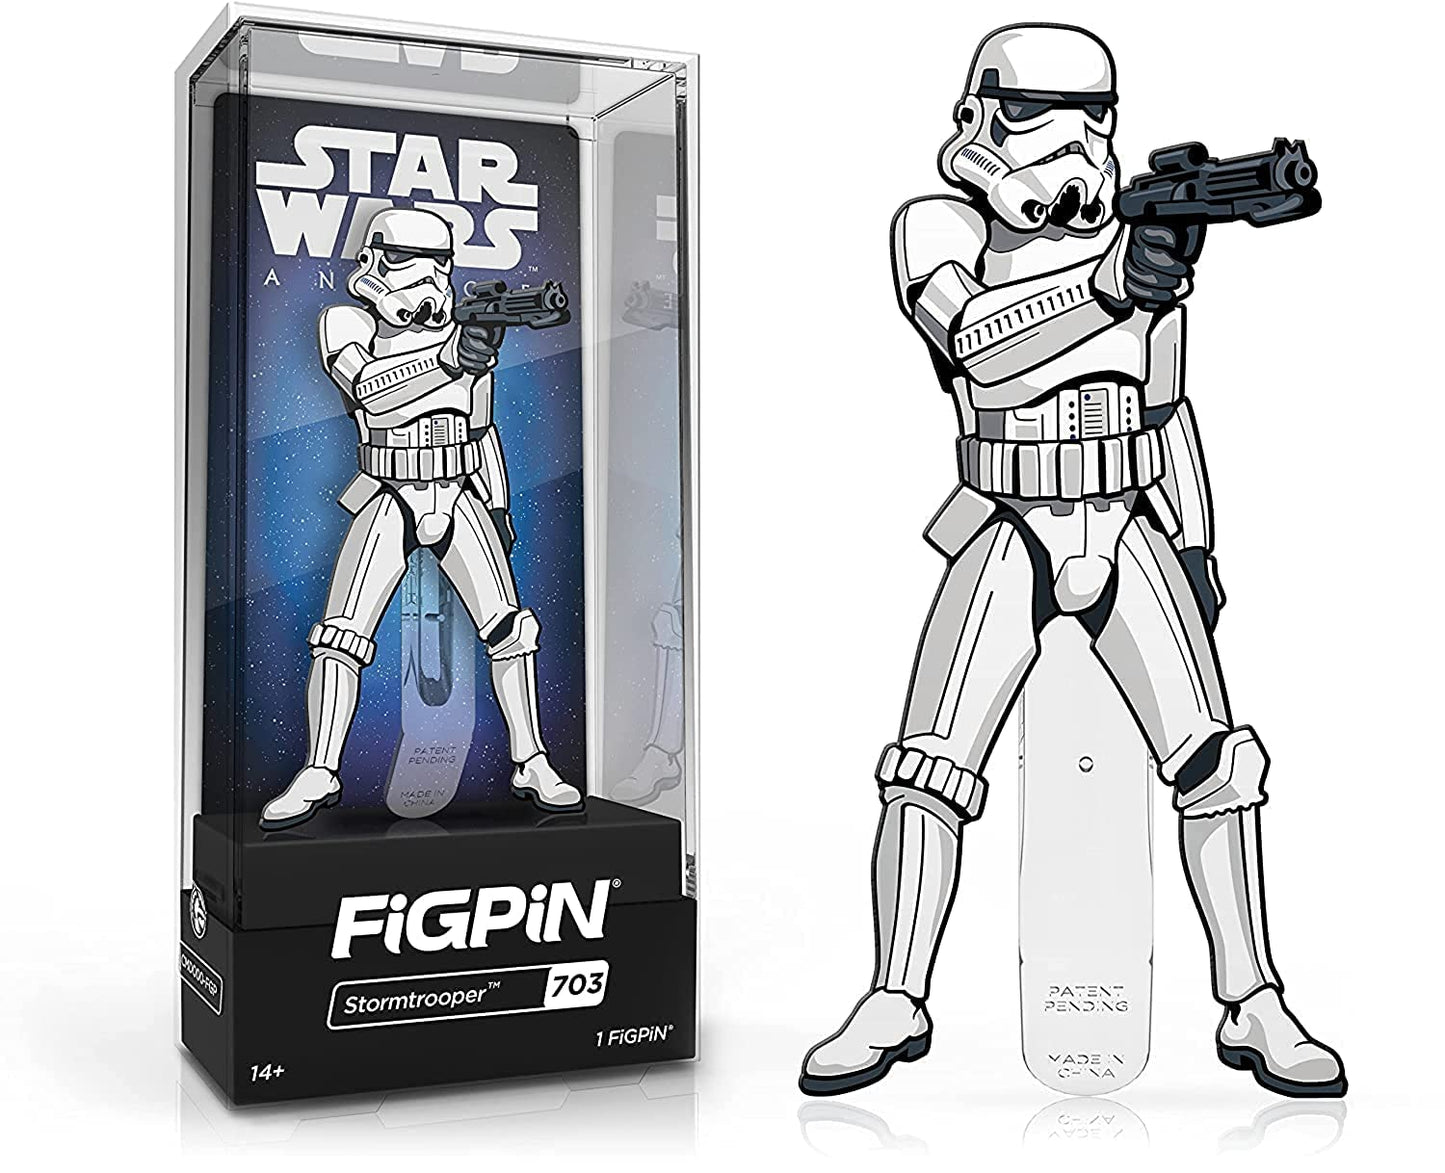 FigPiN Star Wars A New Hope - Stormtrooper (703)